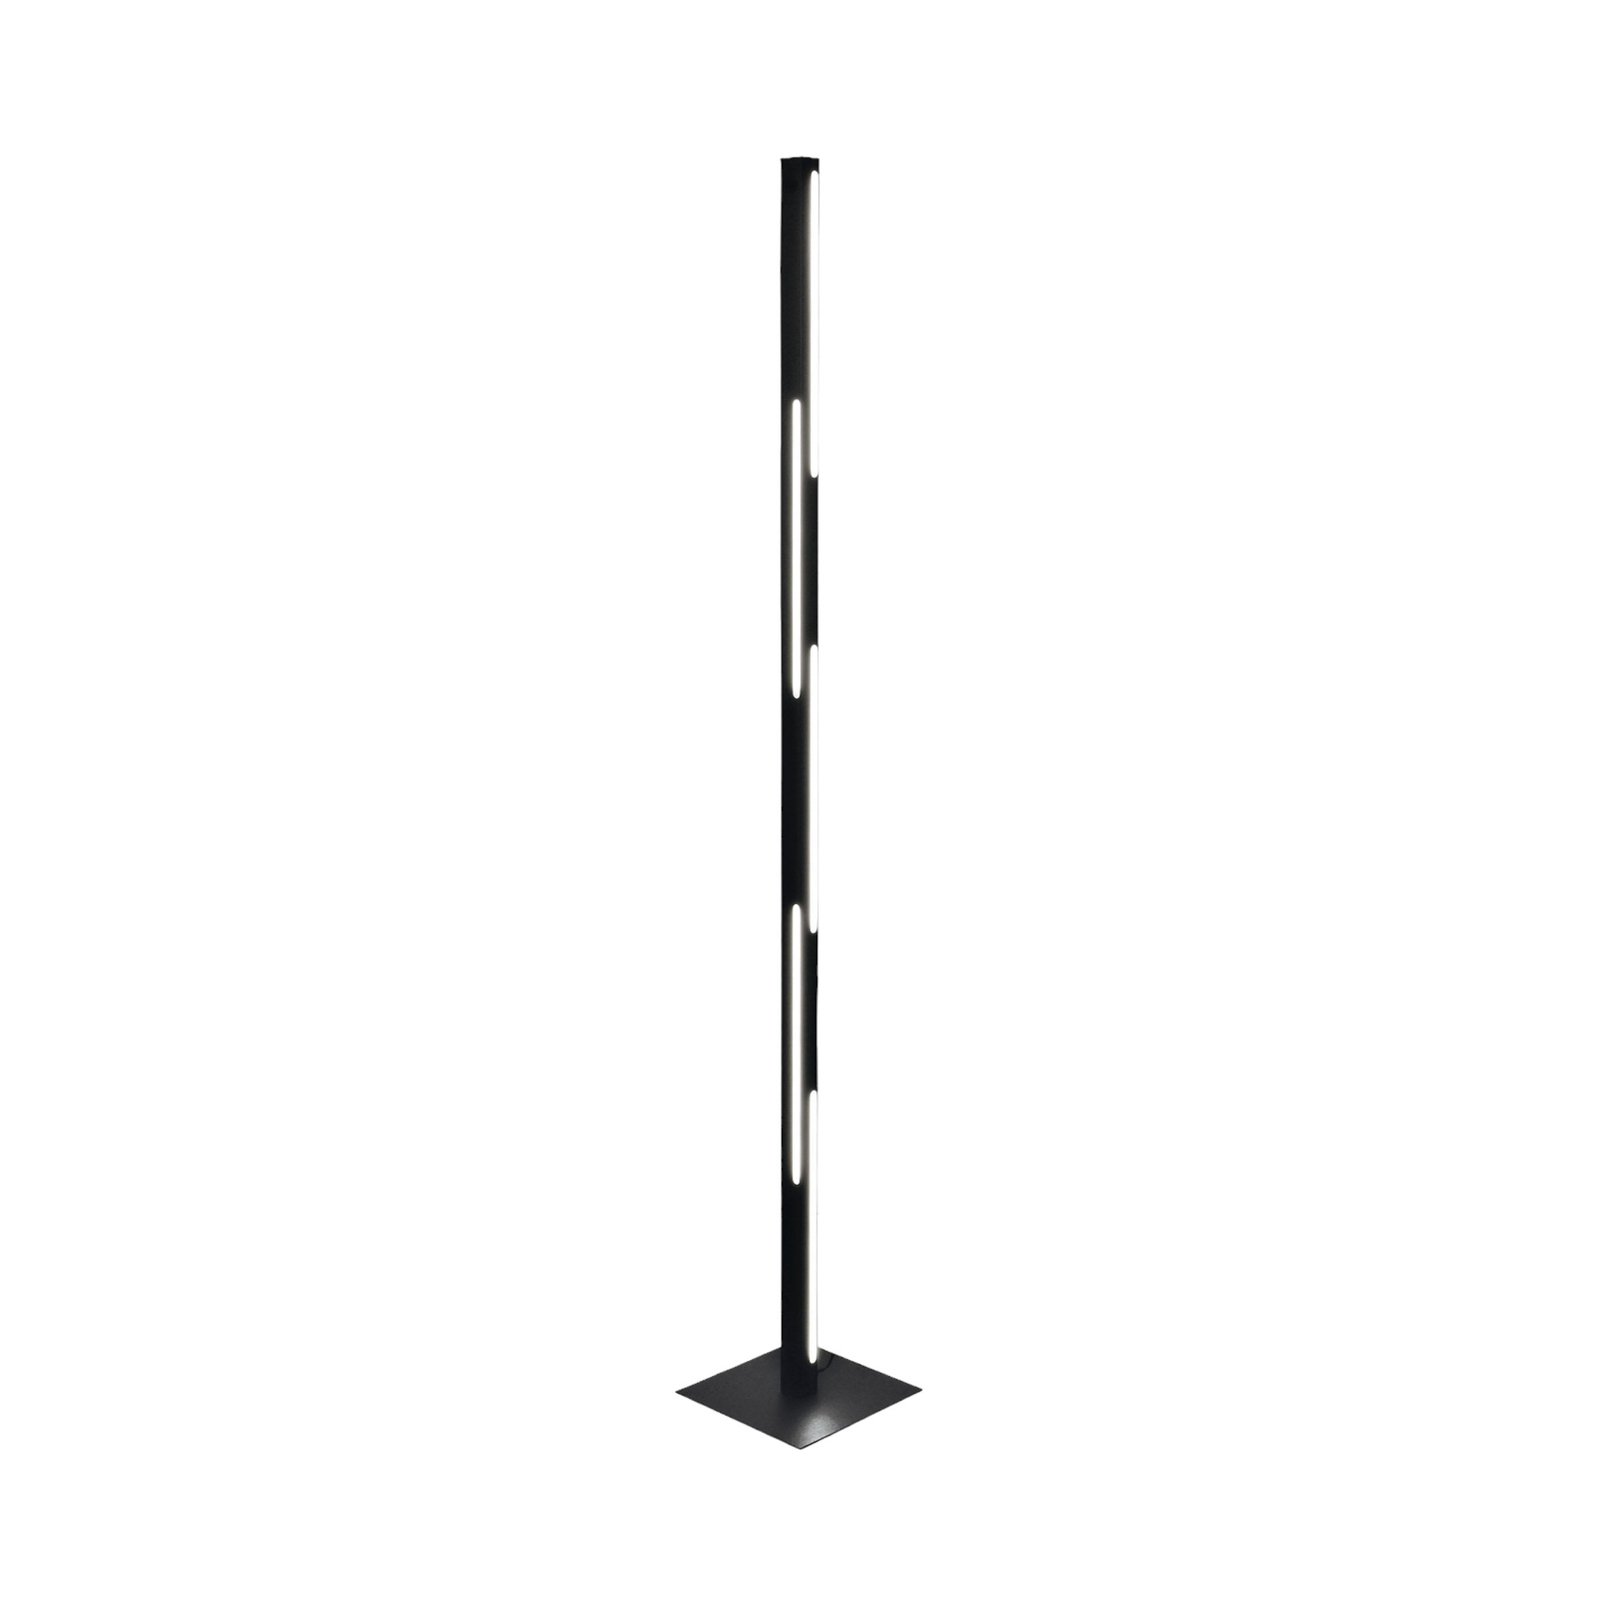 LED-Stehleuchte Ling, schwarz, Höhe 165 cm, dimmbar, Metall